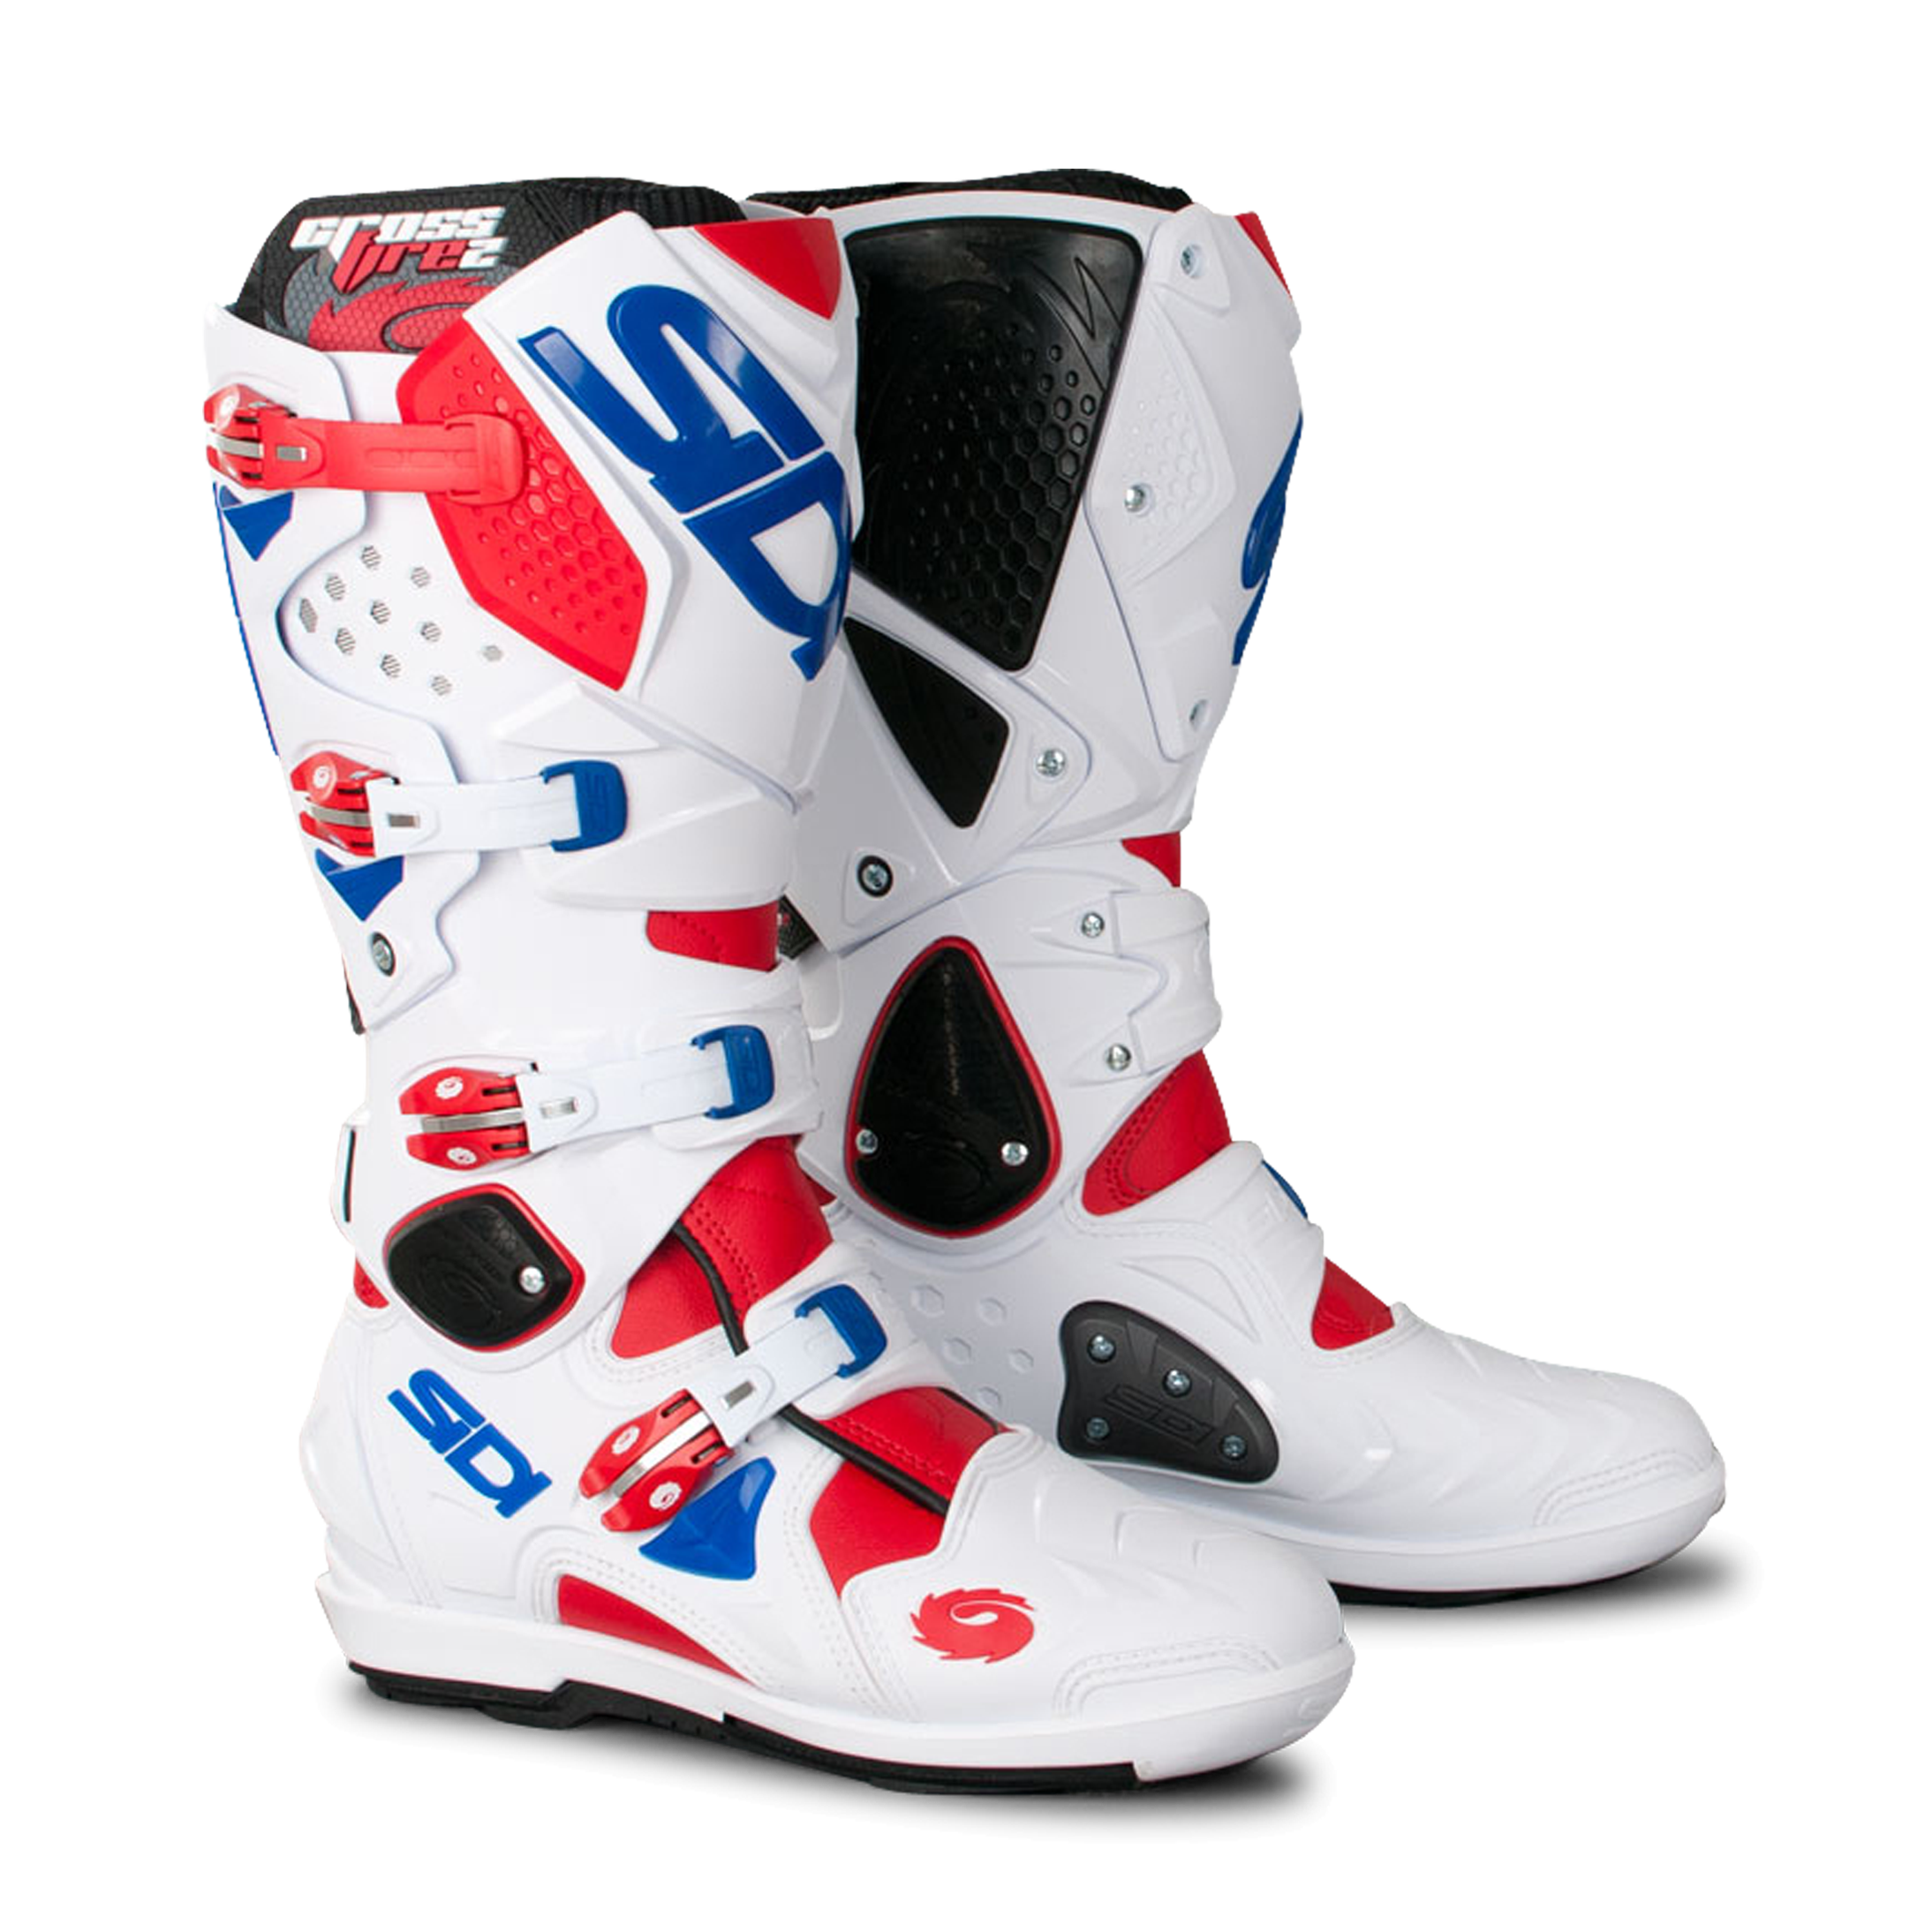 Sidi 2 Srs Online Sale, TO 52% OFF